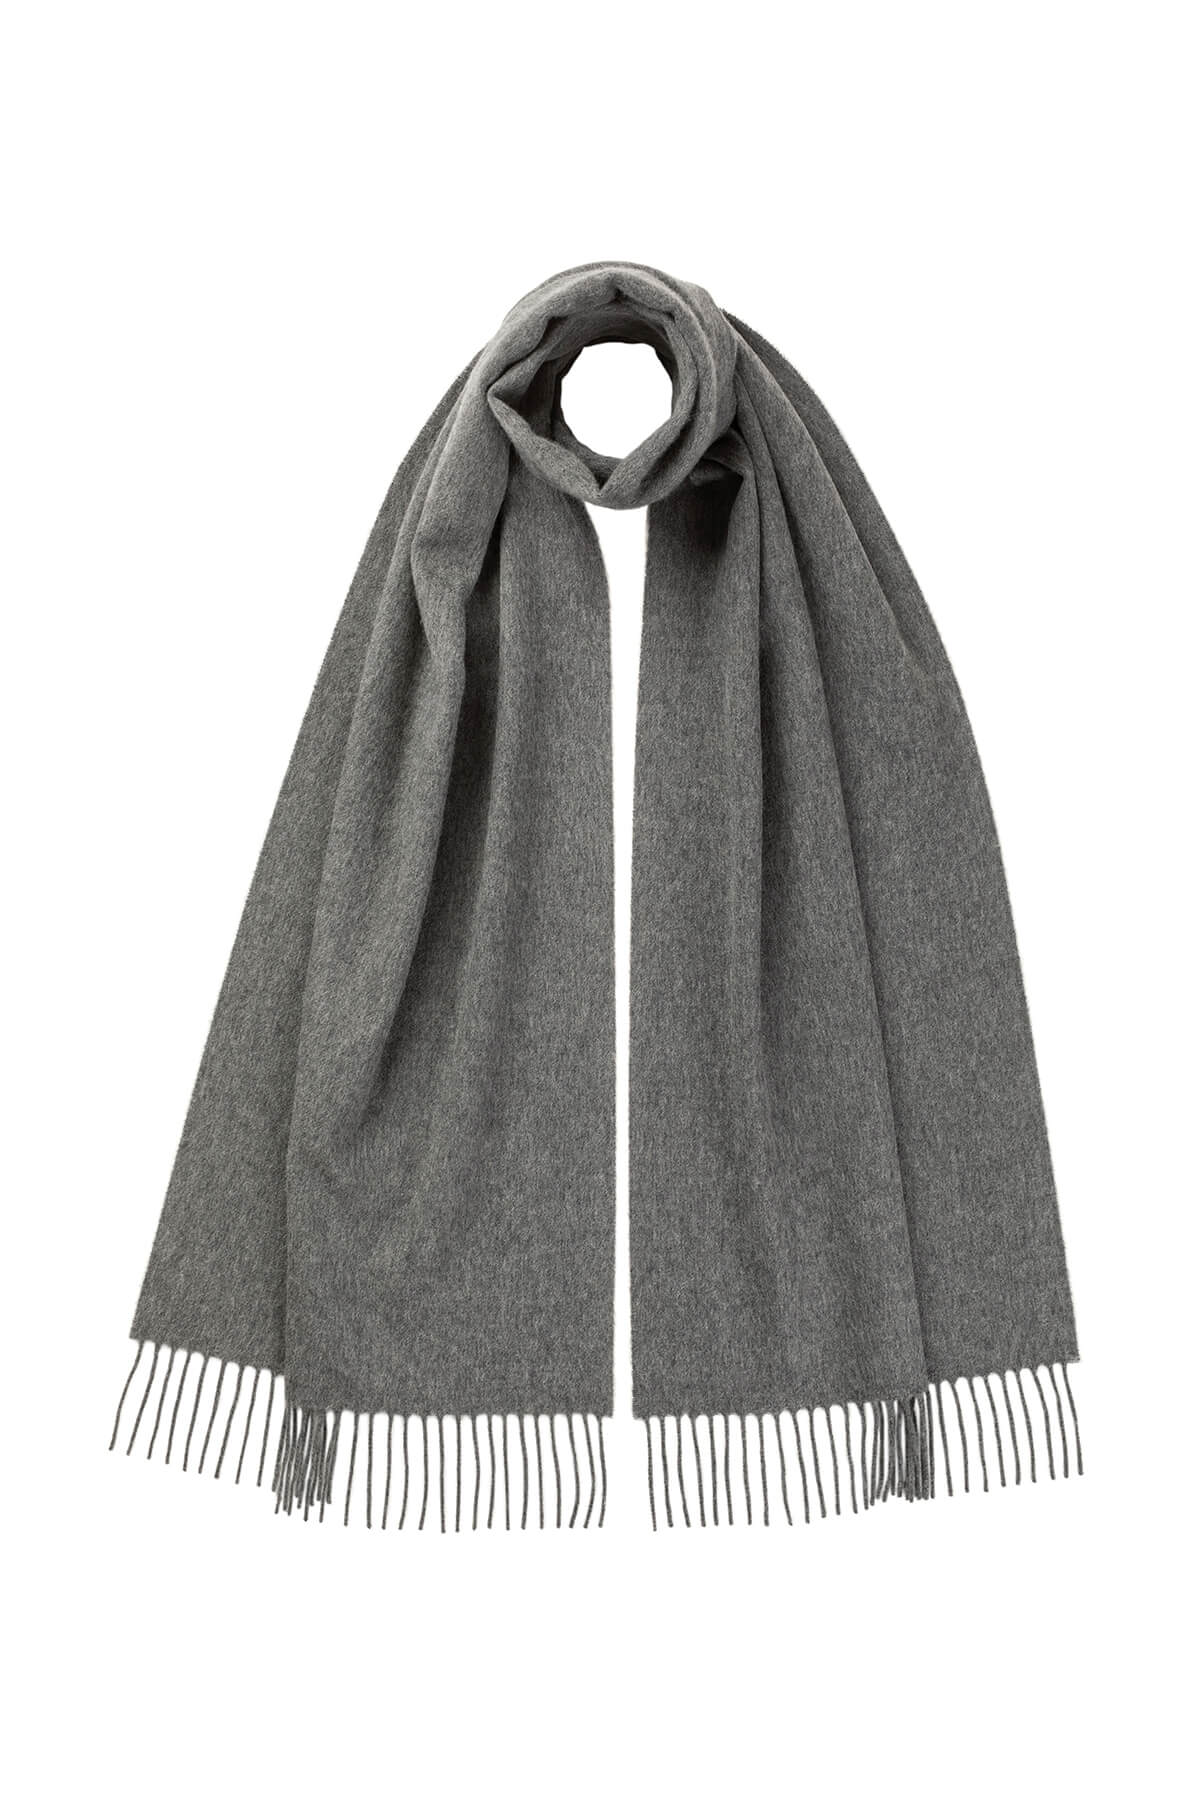 Johnstons of Elgin Ultrafine Merino Wool Scarf in Grey on a white background WDC01797HA0200ONE